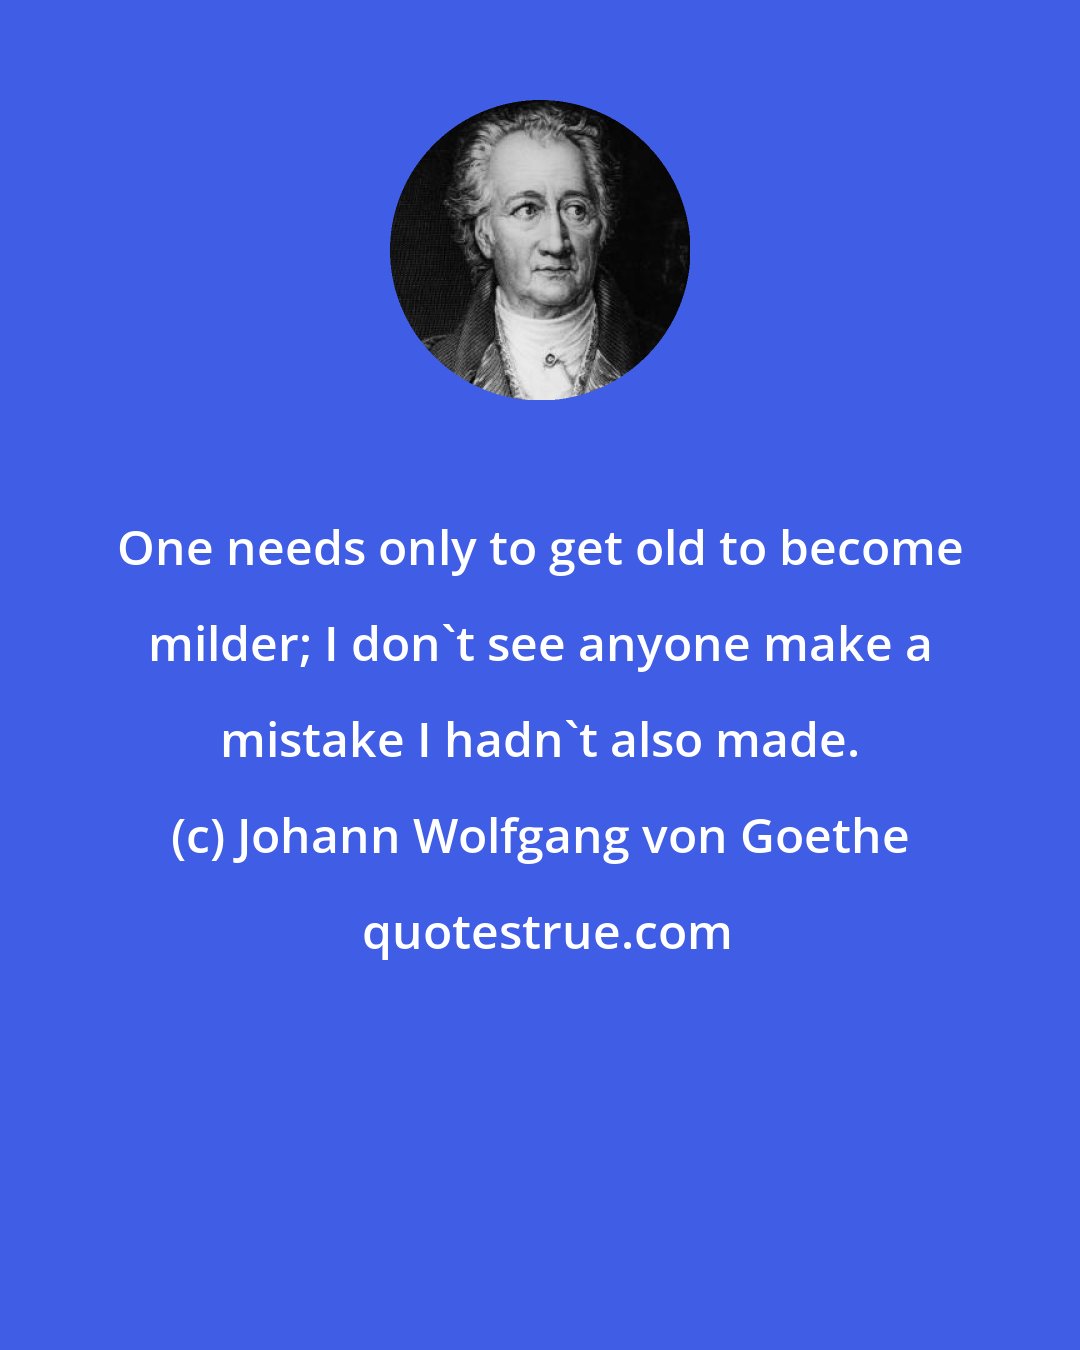 Johann Wolfgang von Goethe: One needs only to get old to become milder; I don't see anyone make a mistake I hadn't also made.